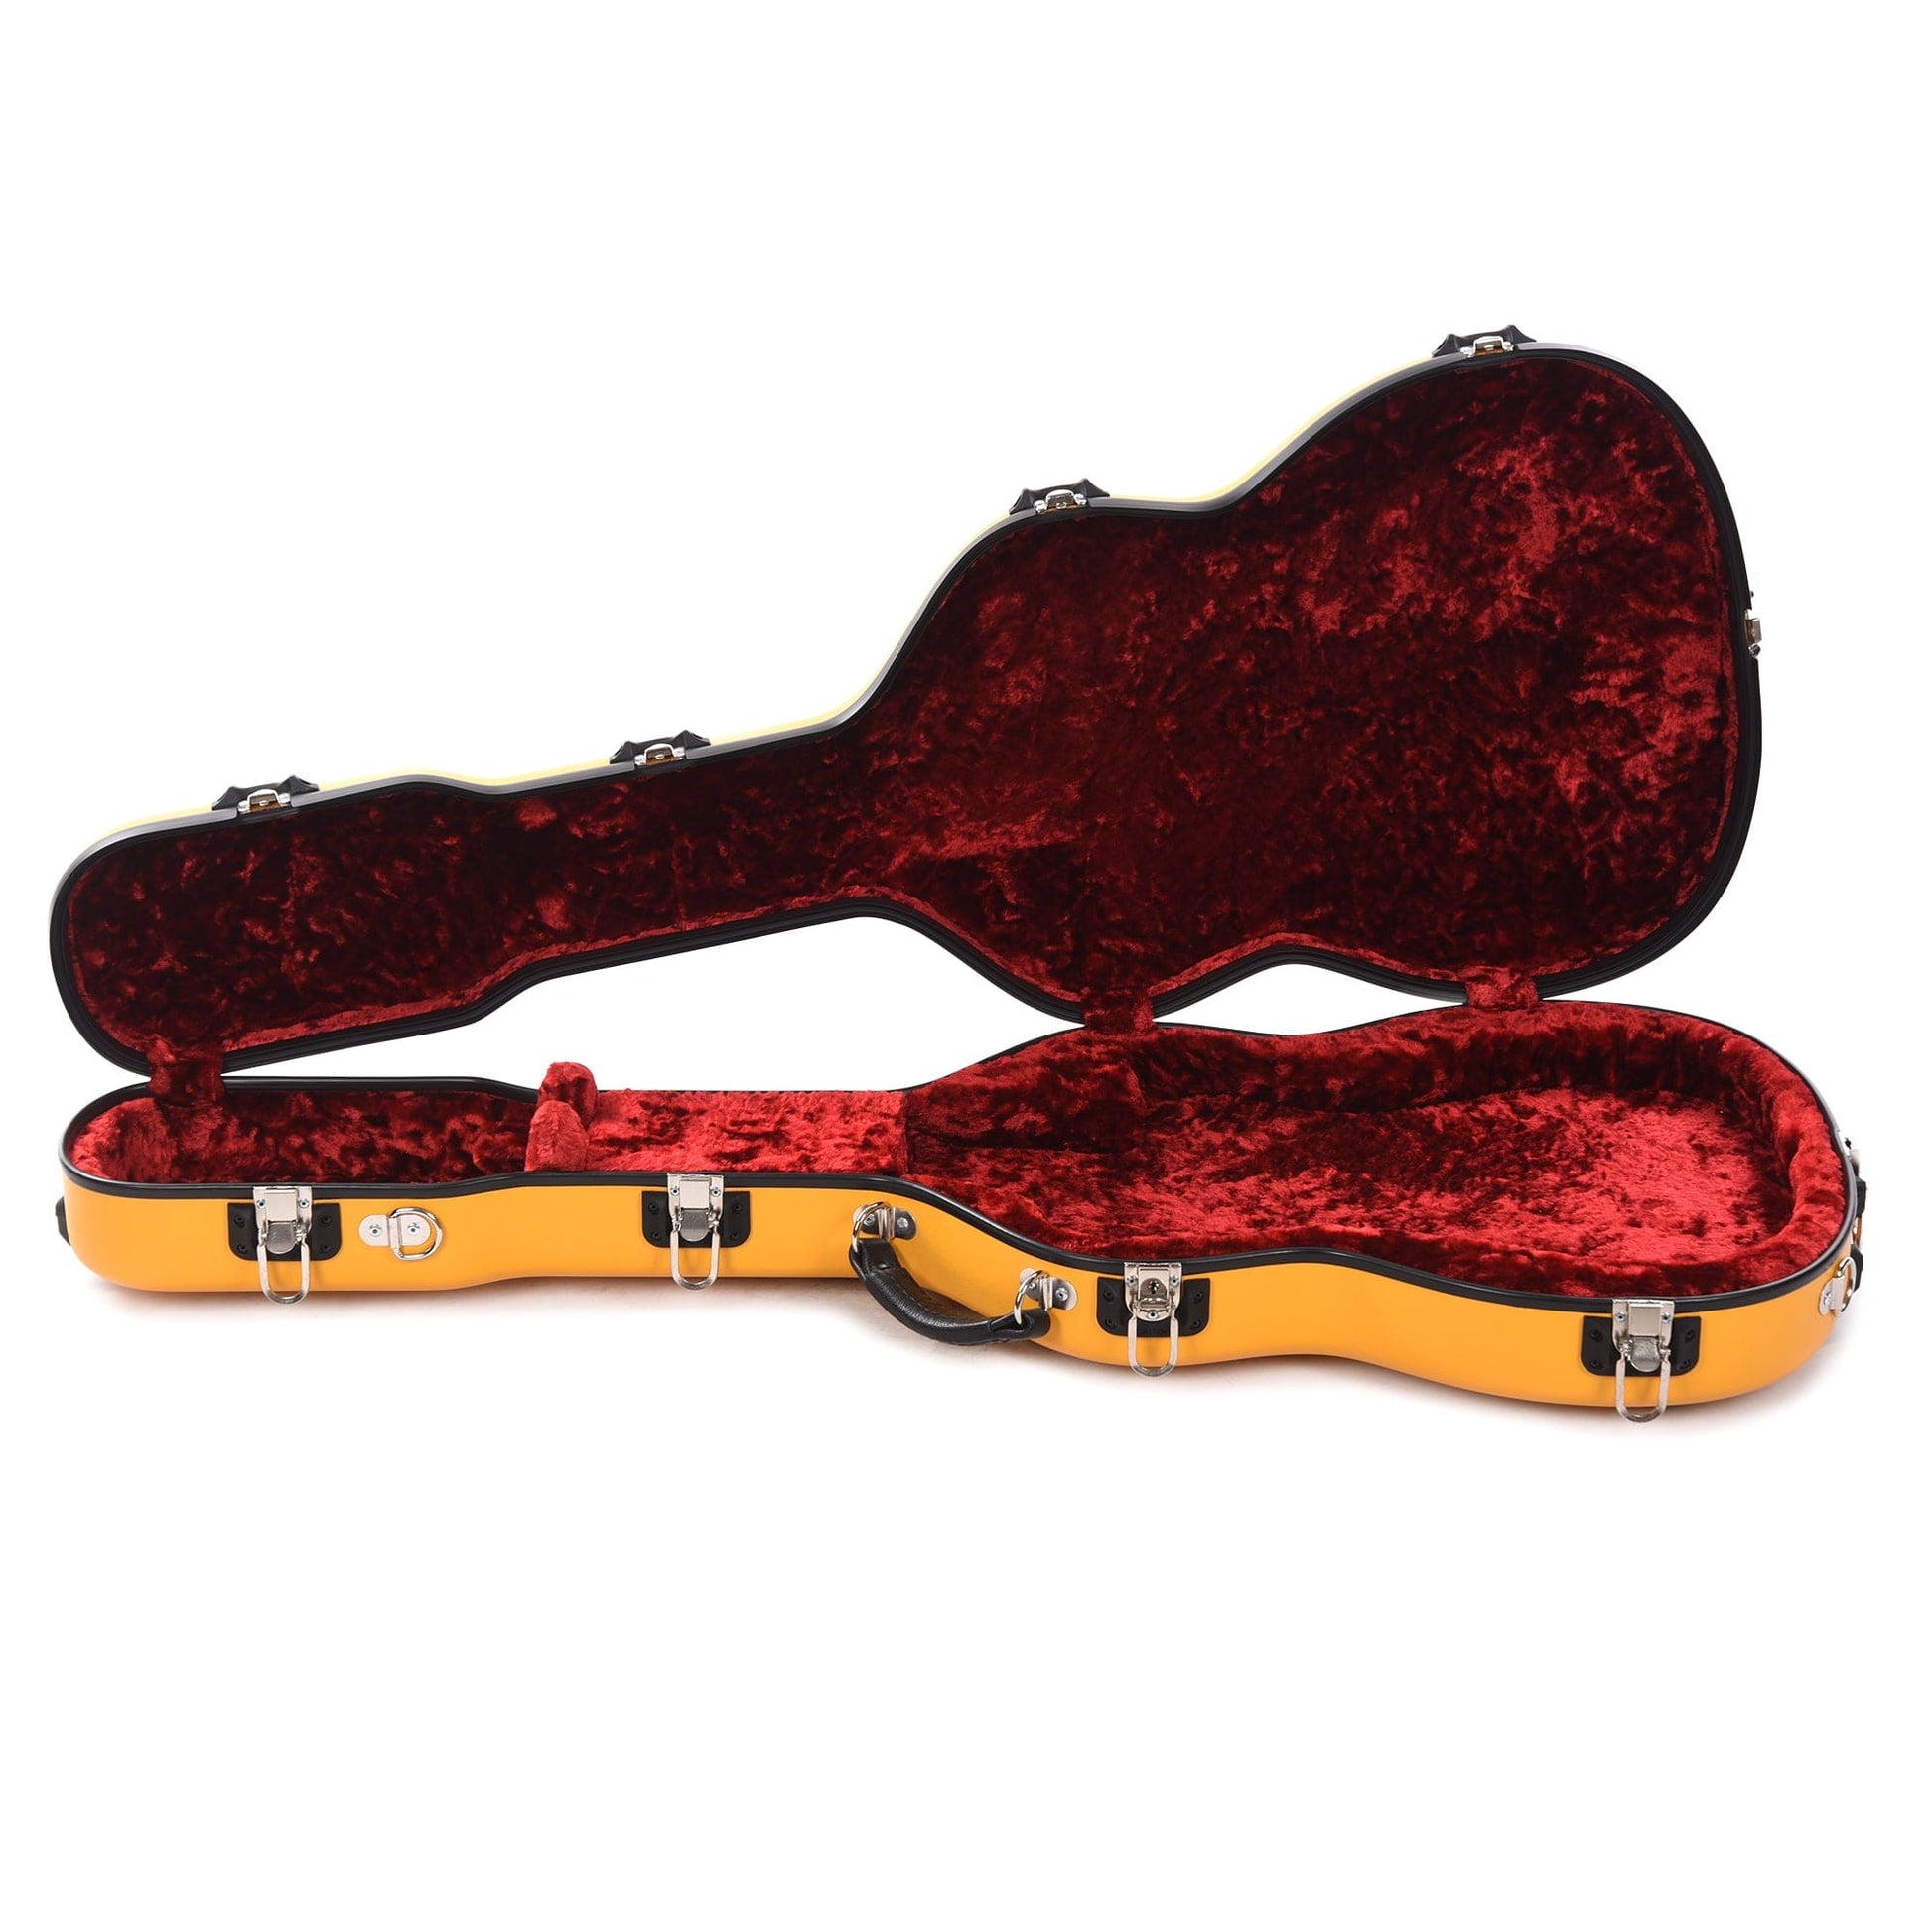 Calton Cases Electric Stratocaster Guitar Case Yellow w/Red Velvet Interior Accessories / Cases and Gig Bags / Guitar Cases